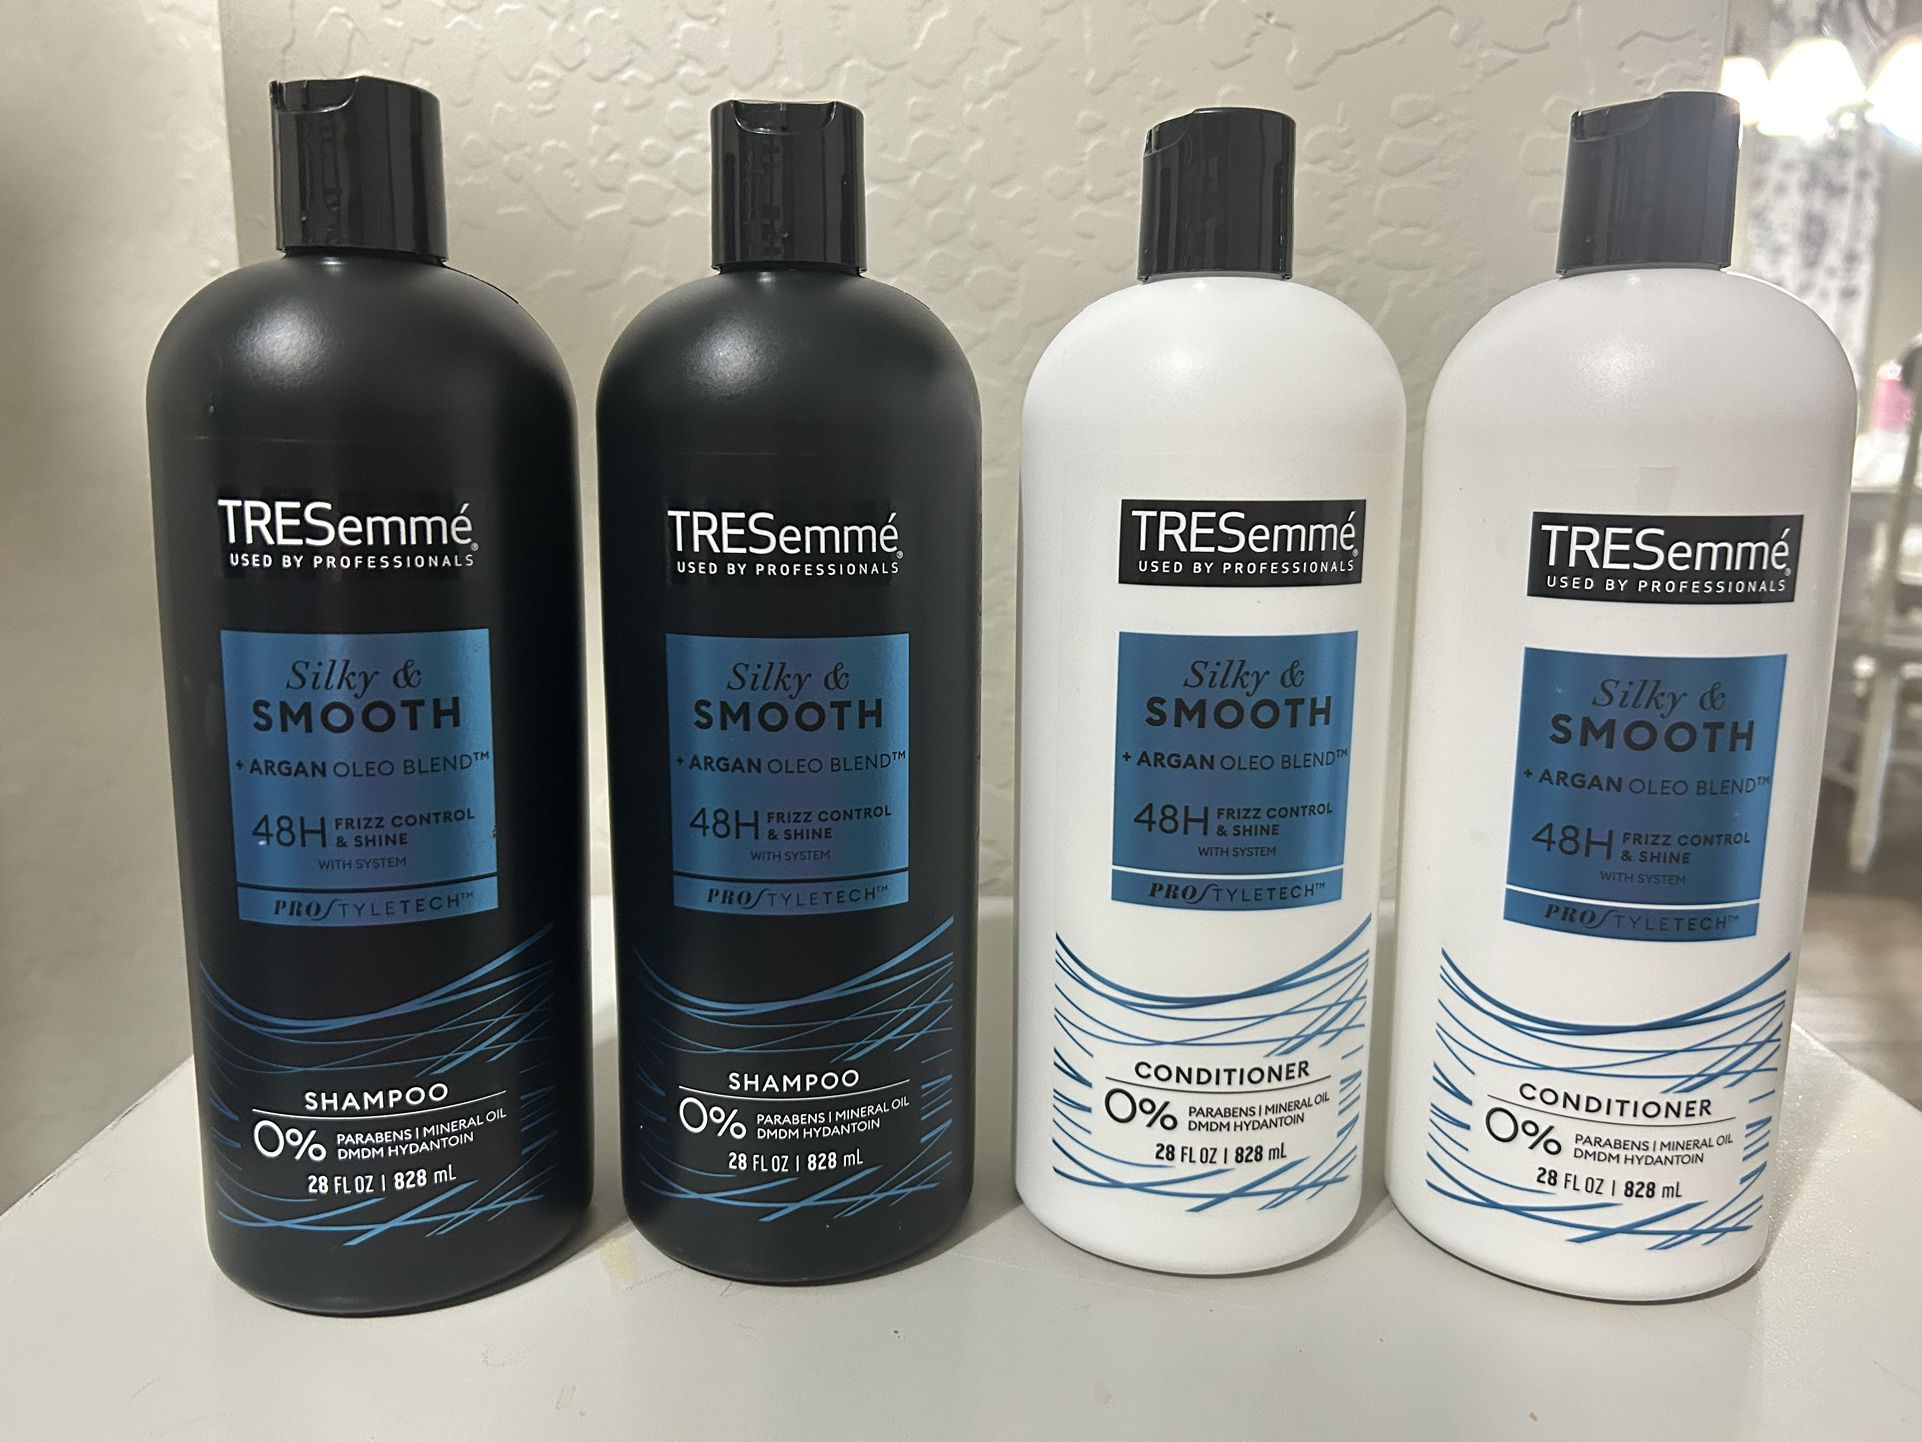 TRESEMME SILKY & SMOOTH SHAMPOO & CONDITIONER 